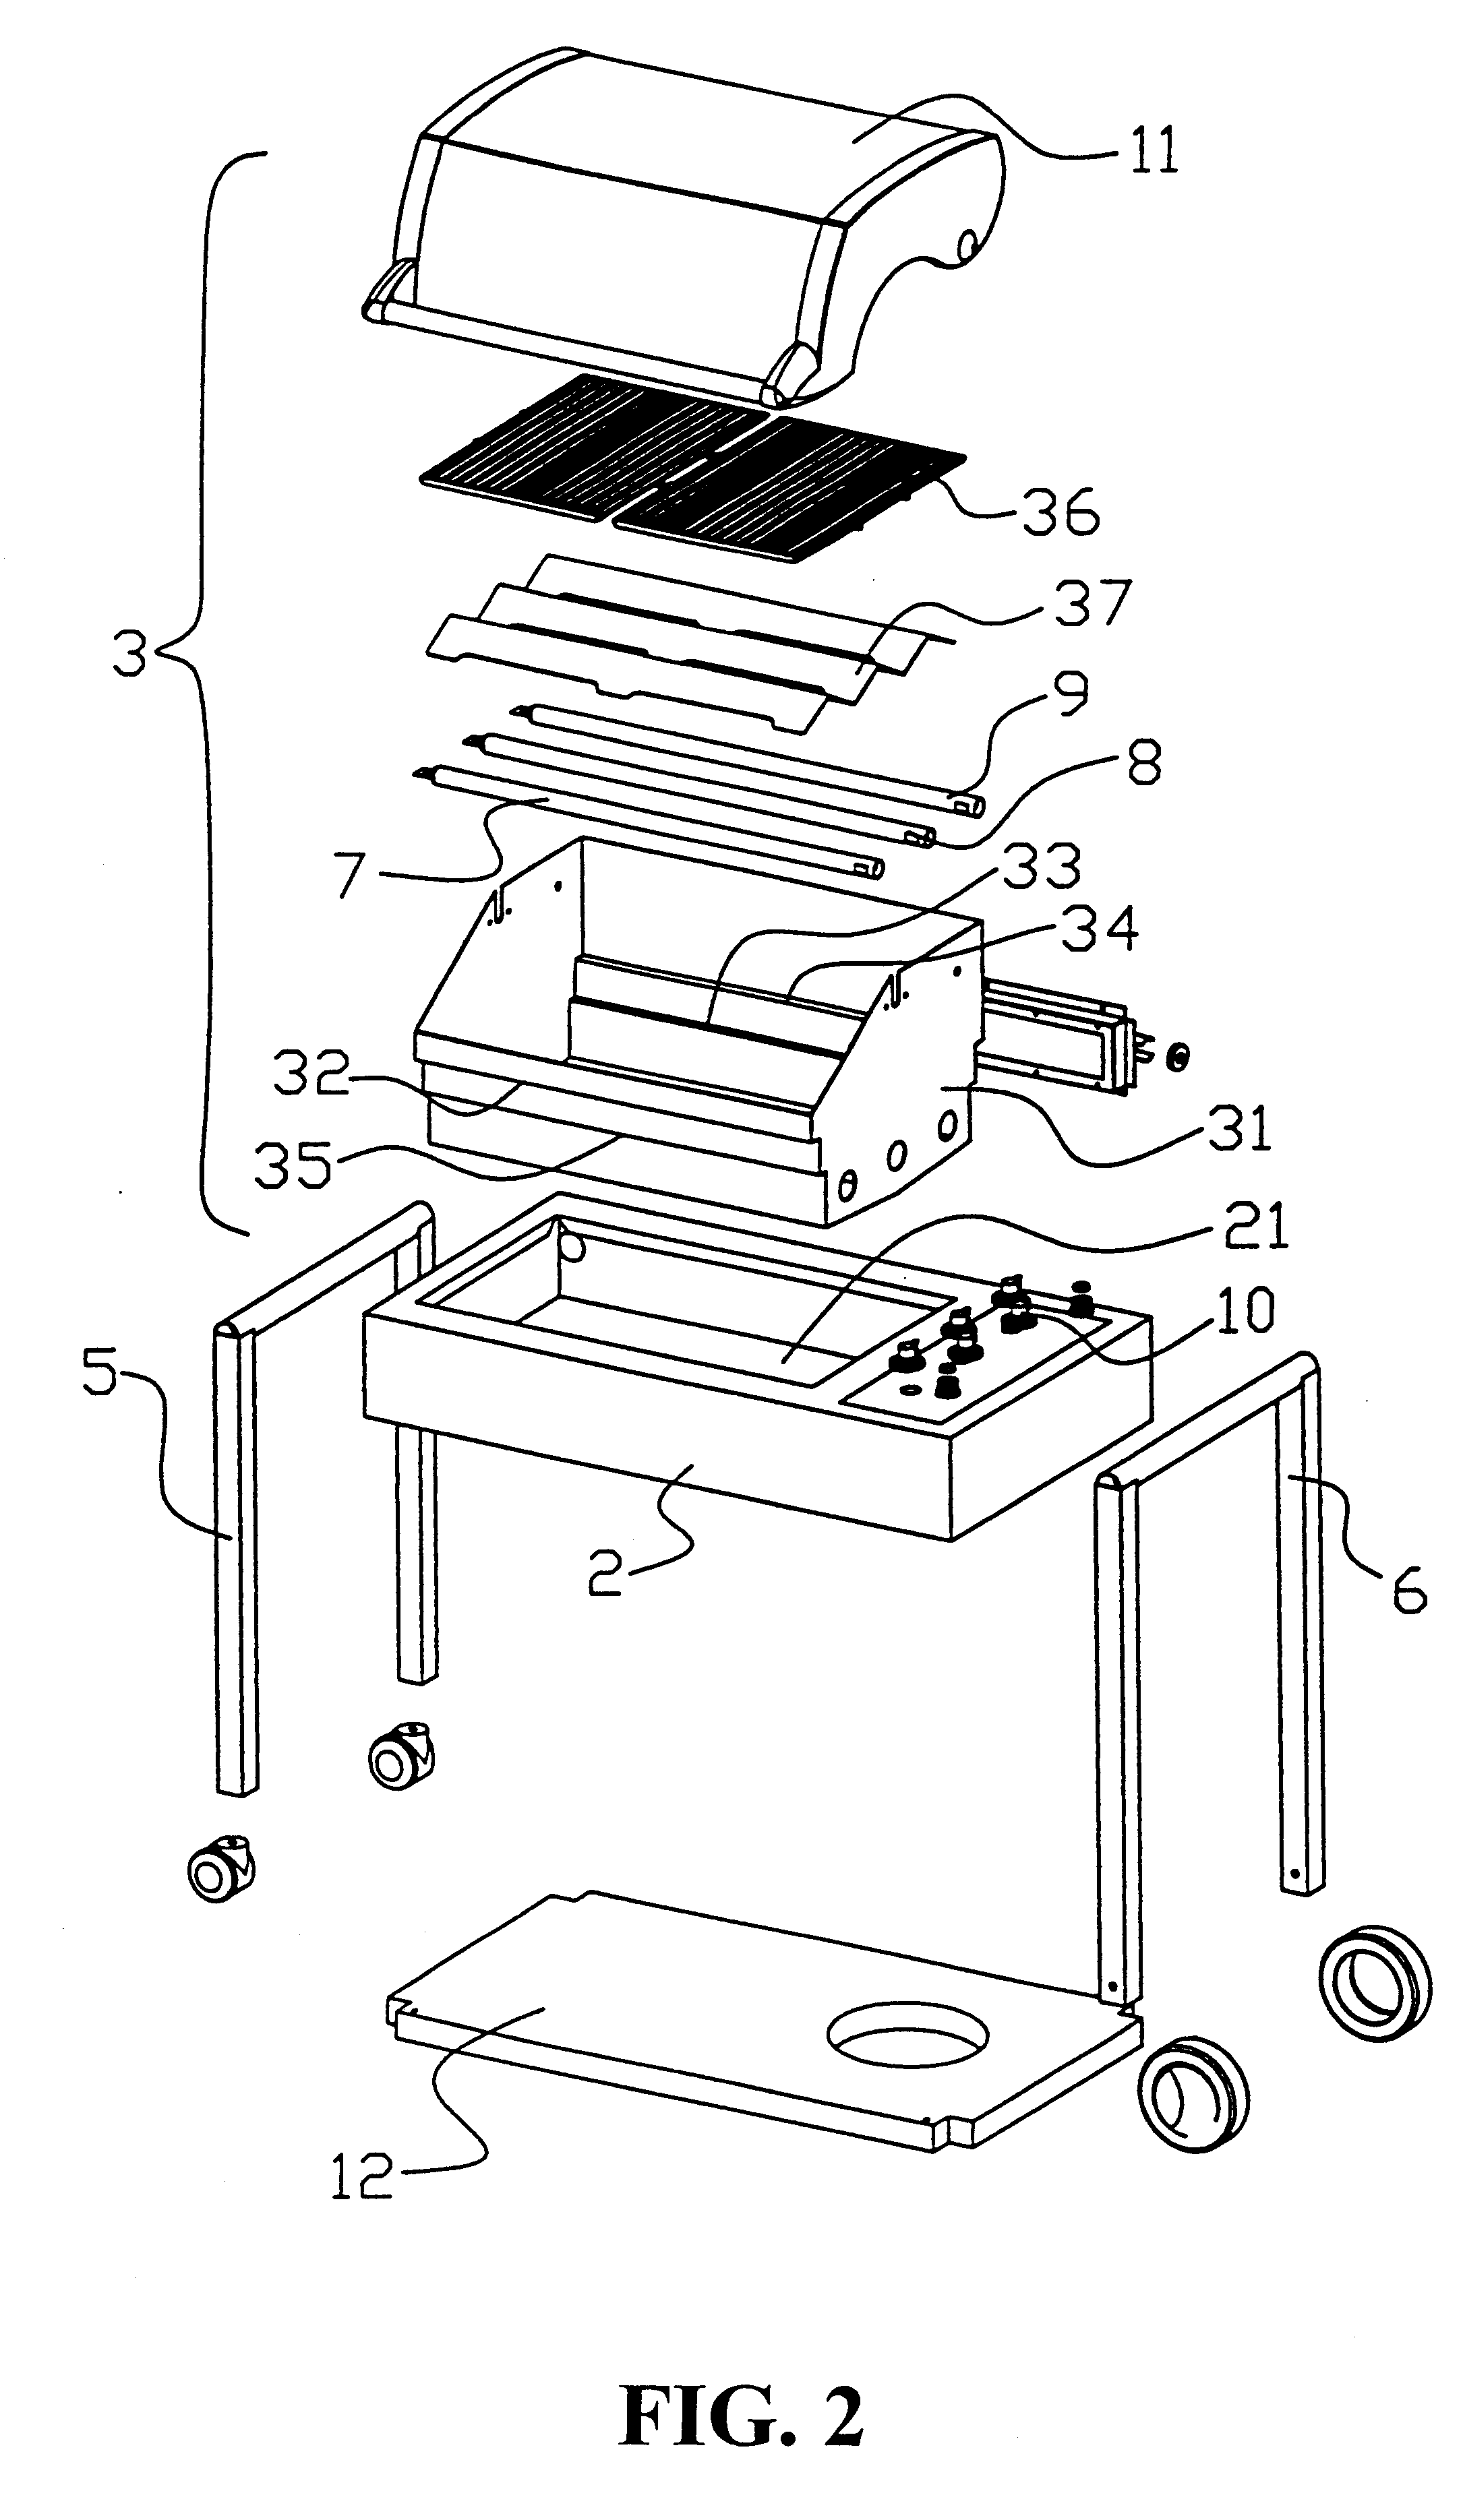 Structure of a barbeque push-cart